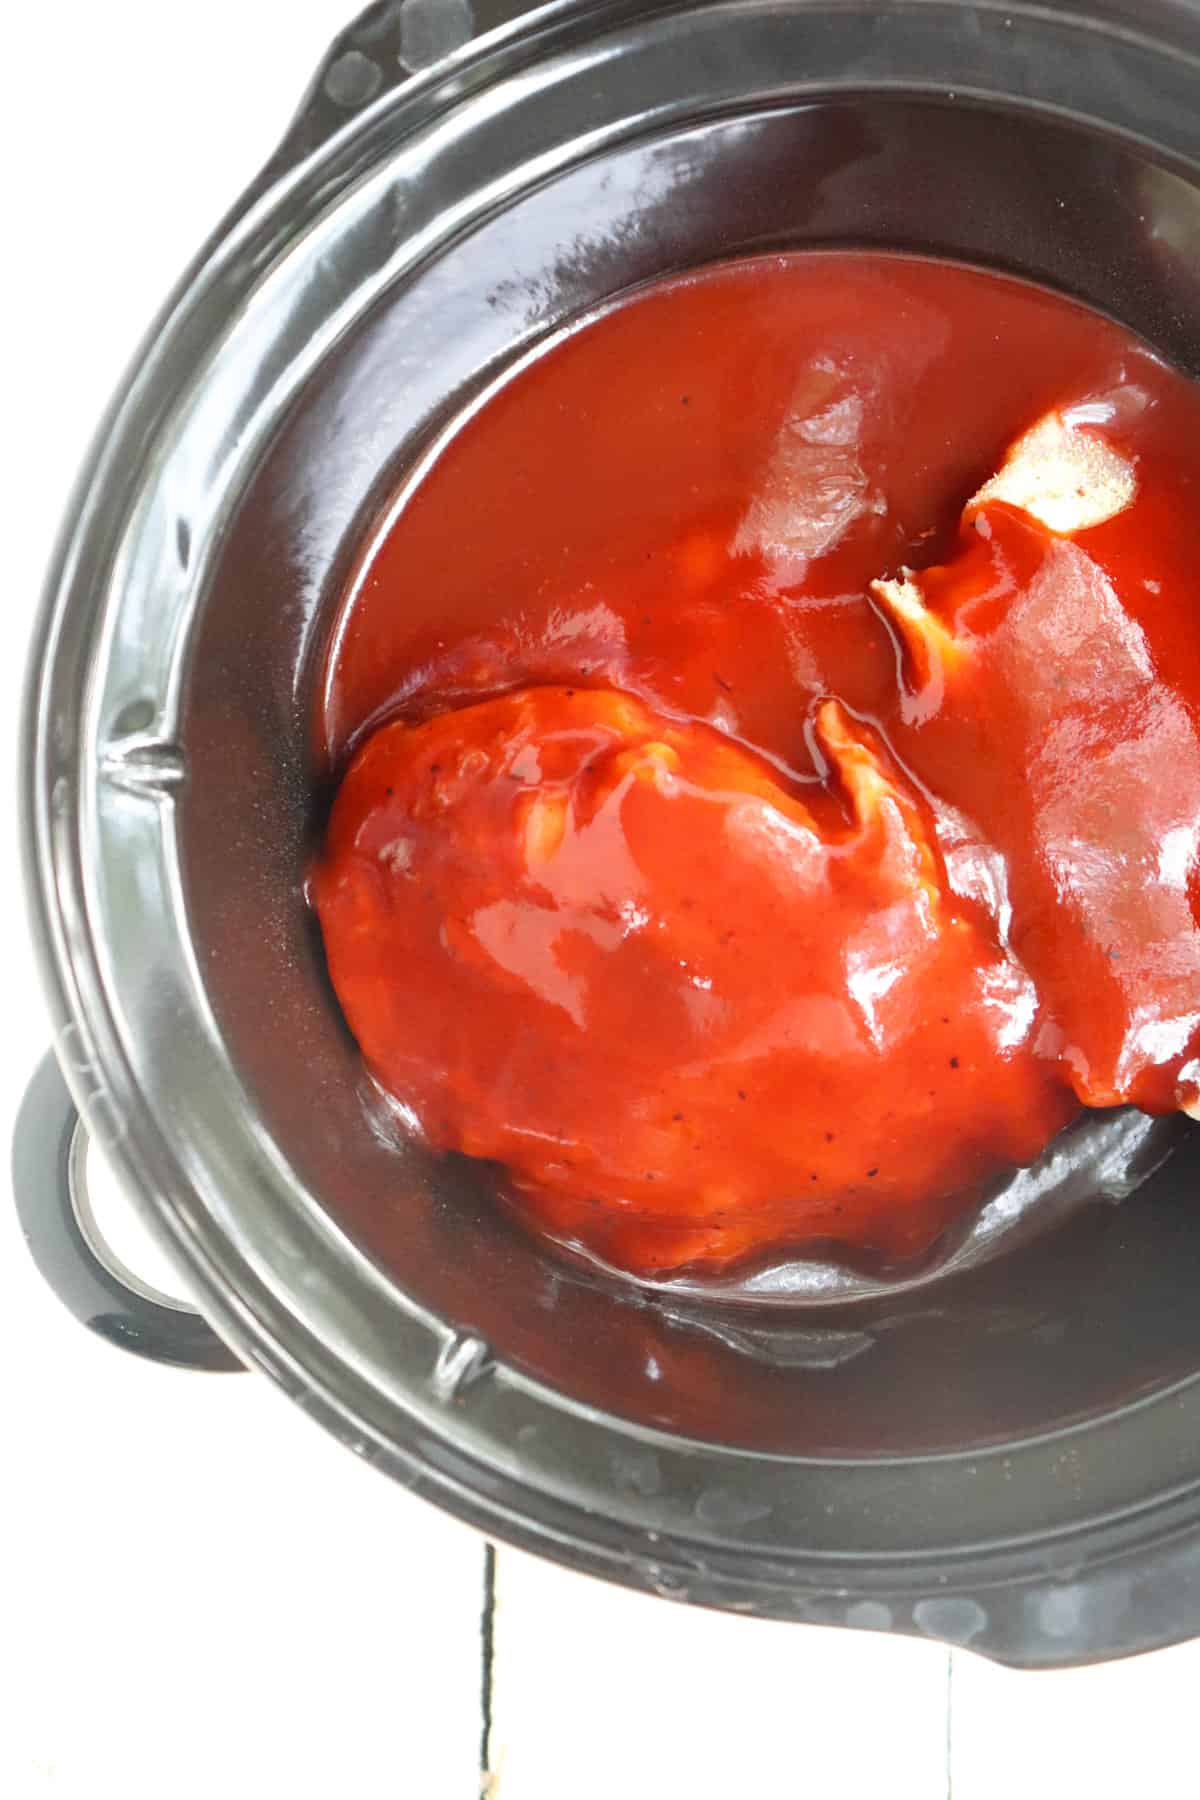 bbq sauce poured over top of chicken in a crock pot.